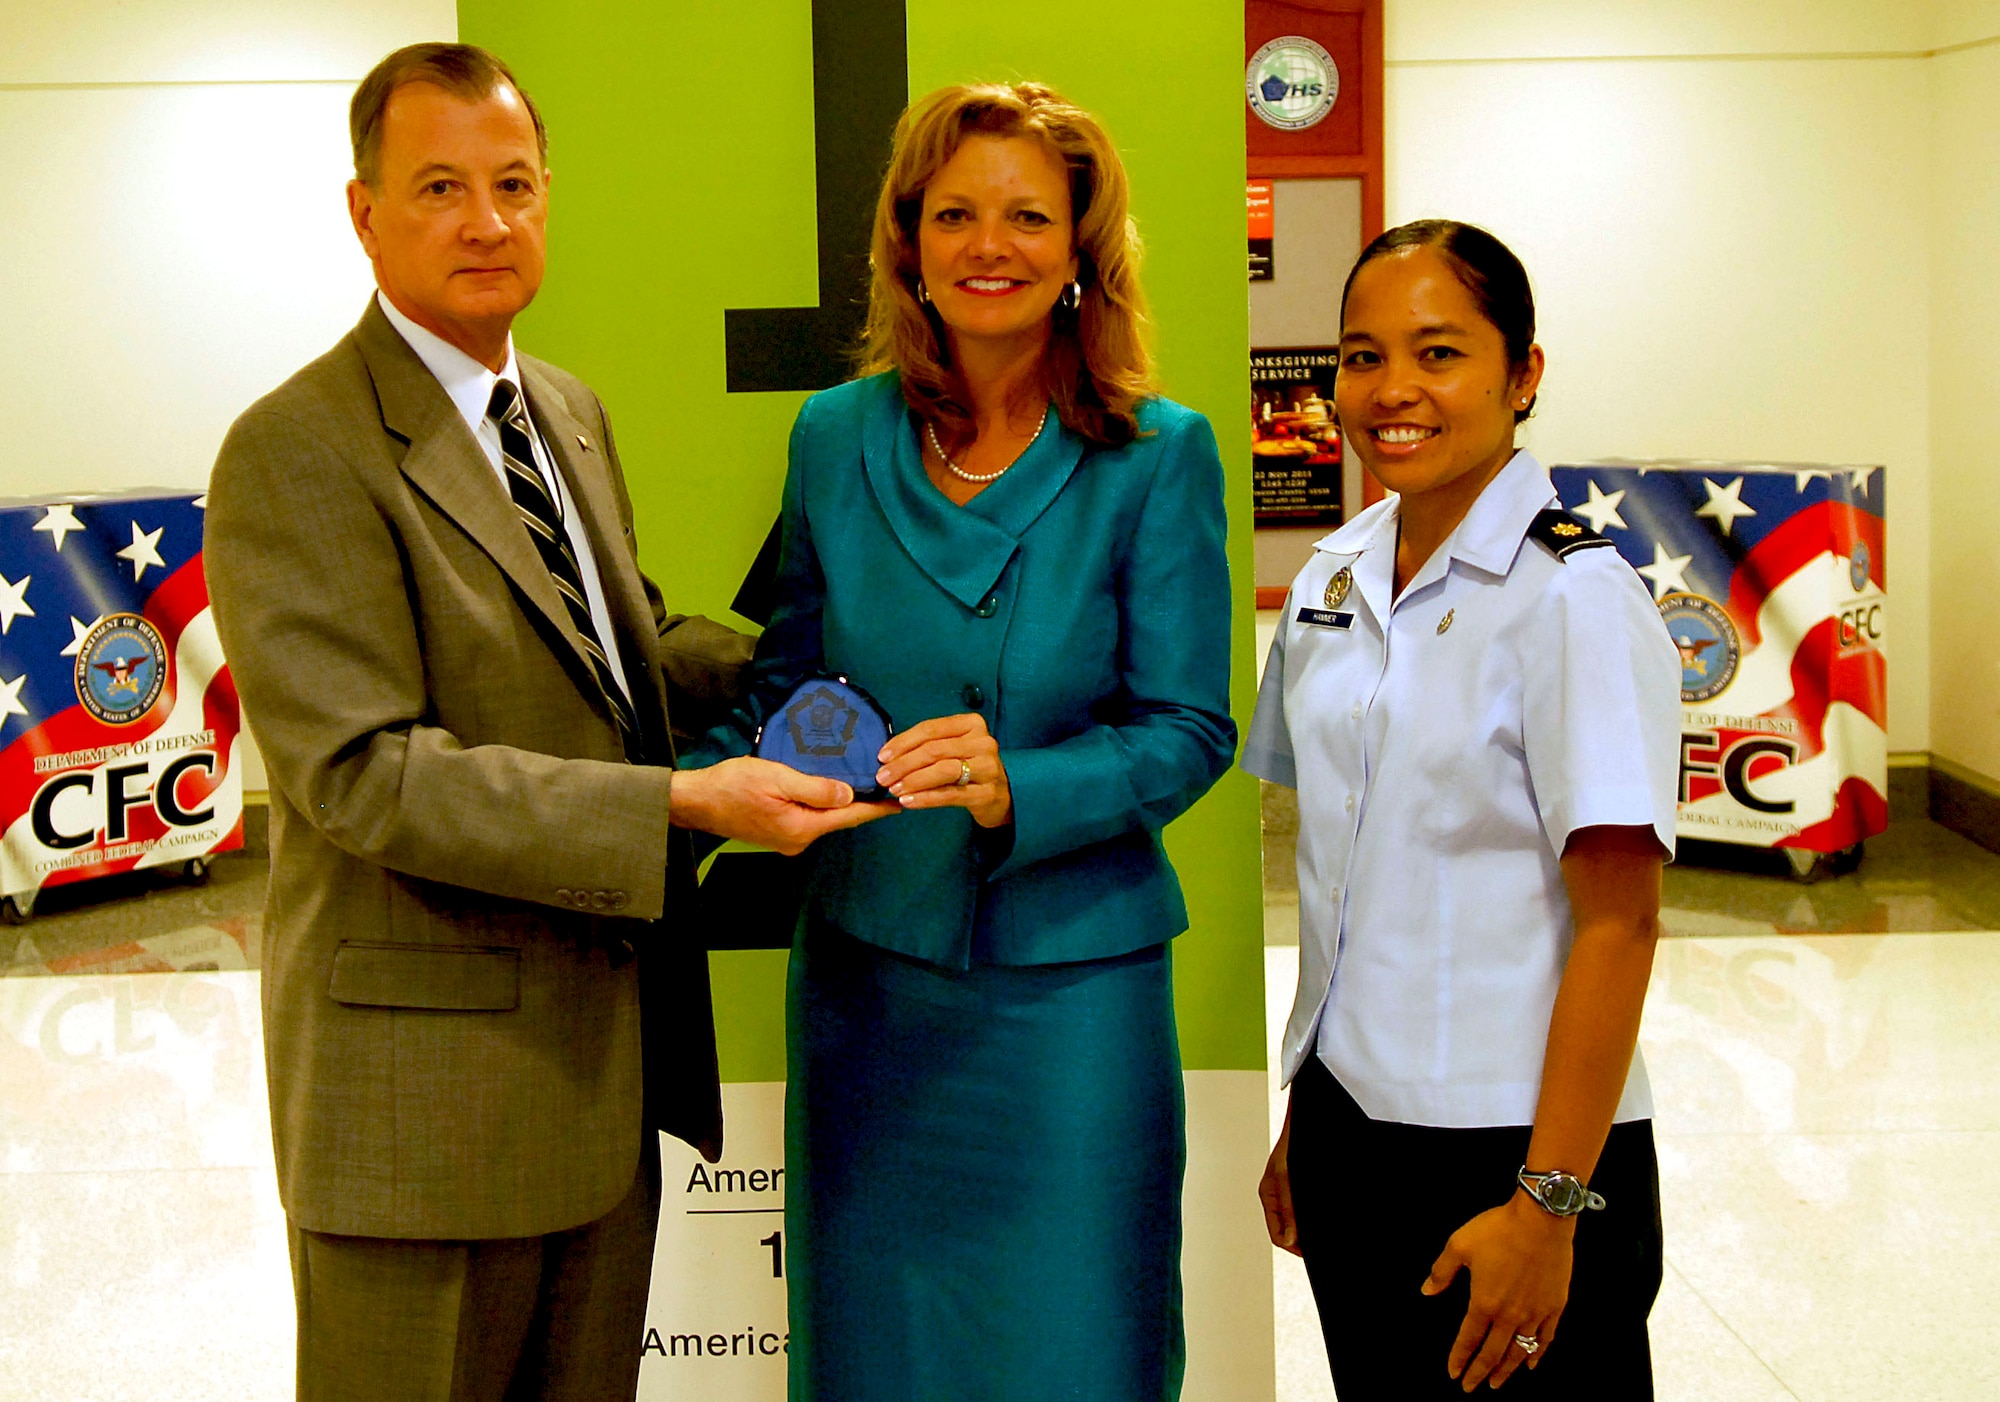 During the Pentagon’s "America Recycles Day" event in Washington on Nov 15., 2011, Debra Tune, the principal deputy assistant secretary of the Air Force for installations, environment and logistics, and Maj. Elisa Hammer, of the Office of the Deputy Assistant Secretary of the Air Force for Environment, Safety and Occupational Health, accepted the Pentagon's Green Award on behalf of the Air Force's Installations, Environment and Logistics Office from the Pentagon's Director of Facilities Bradley Provancha. (U.S. Air Force photo/Tech. Sgt. Richard Williams)